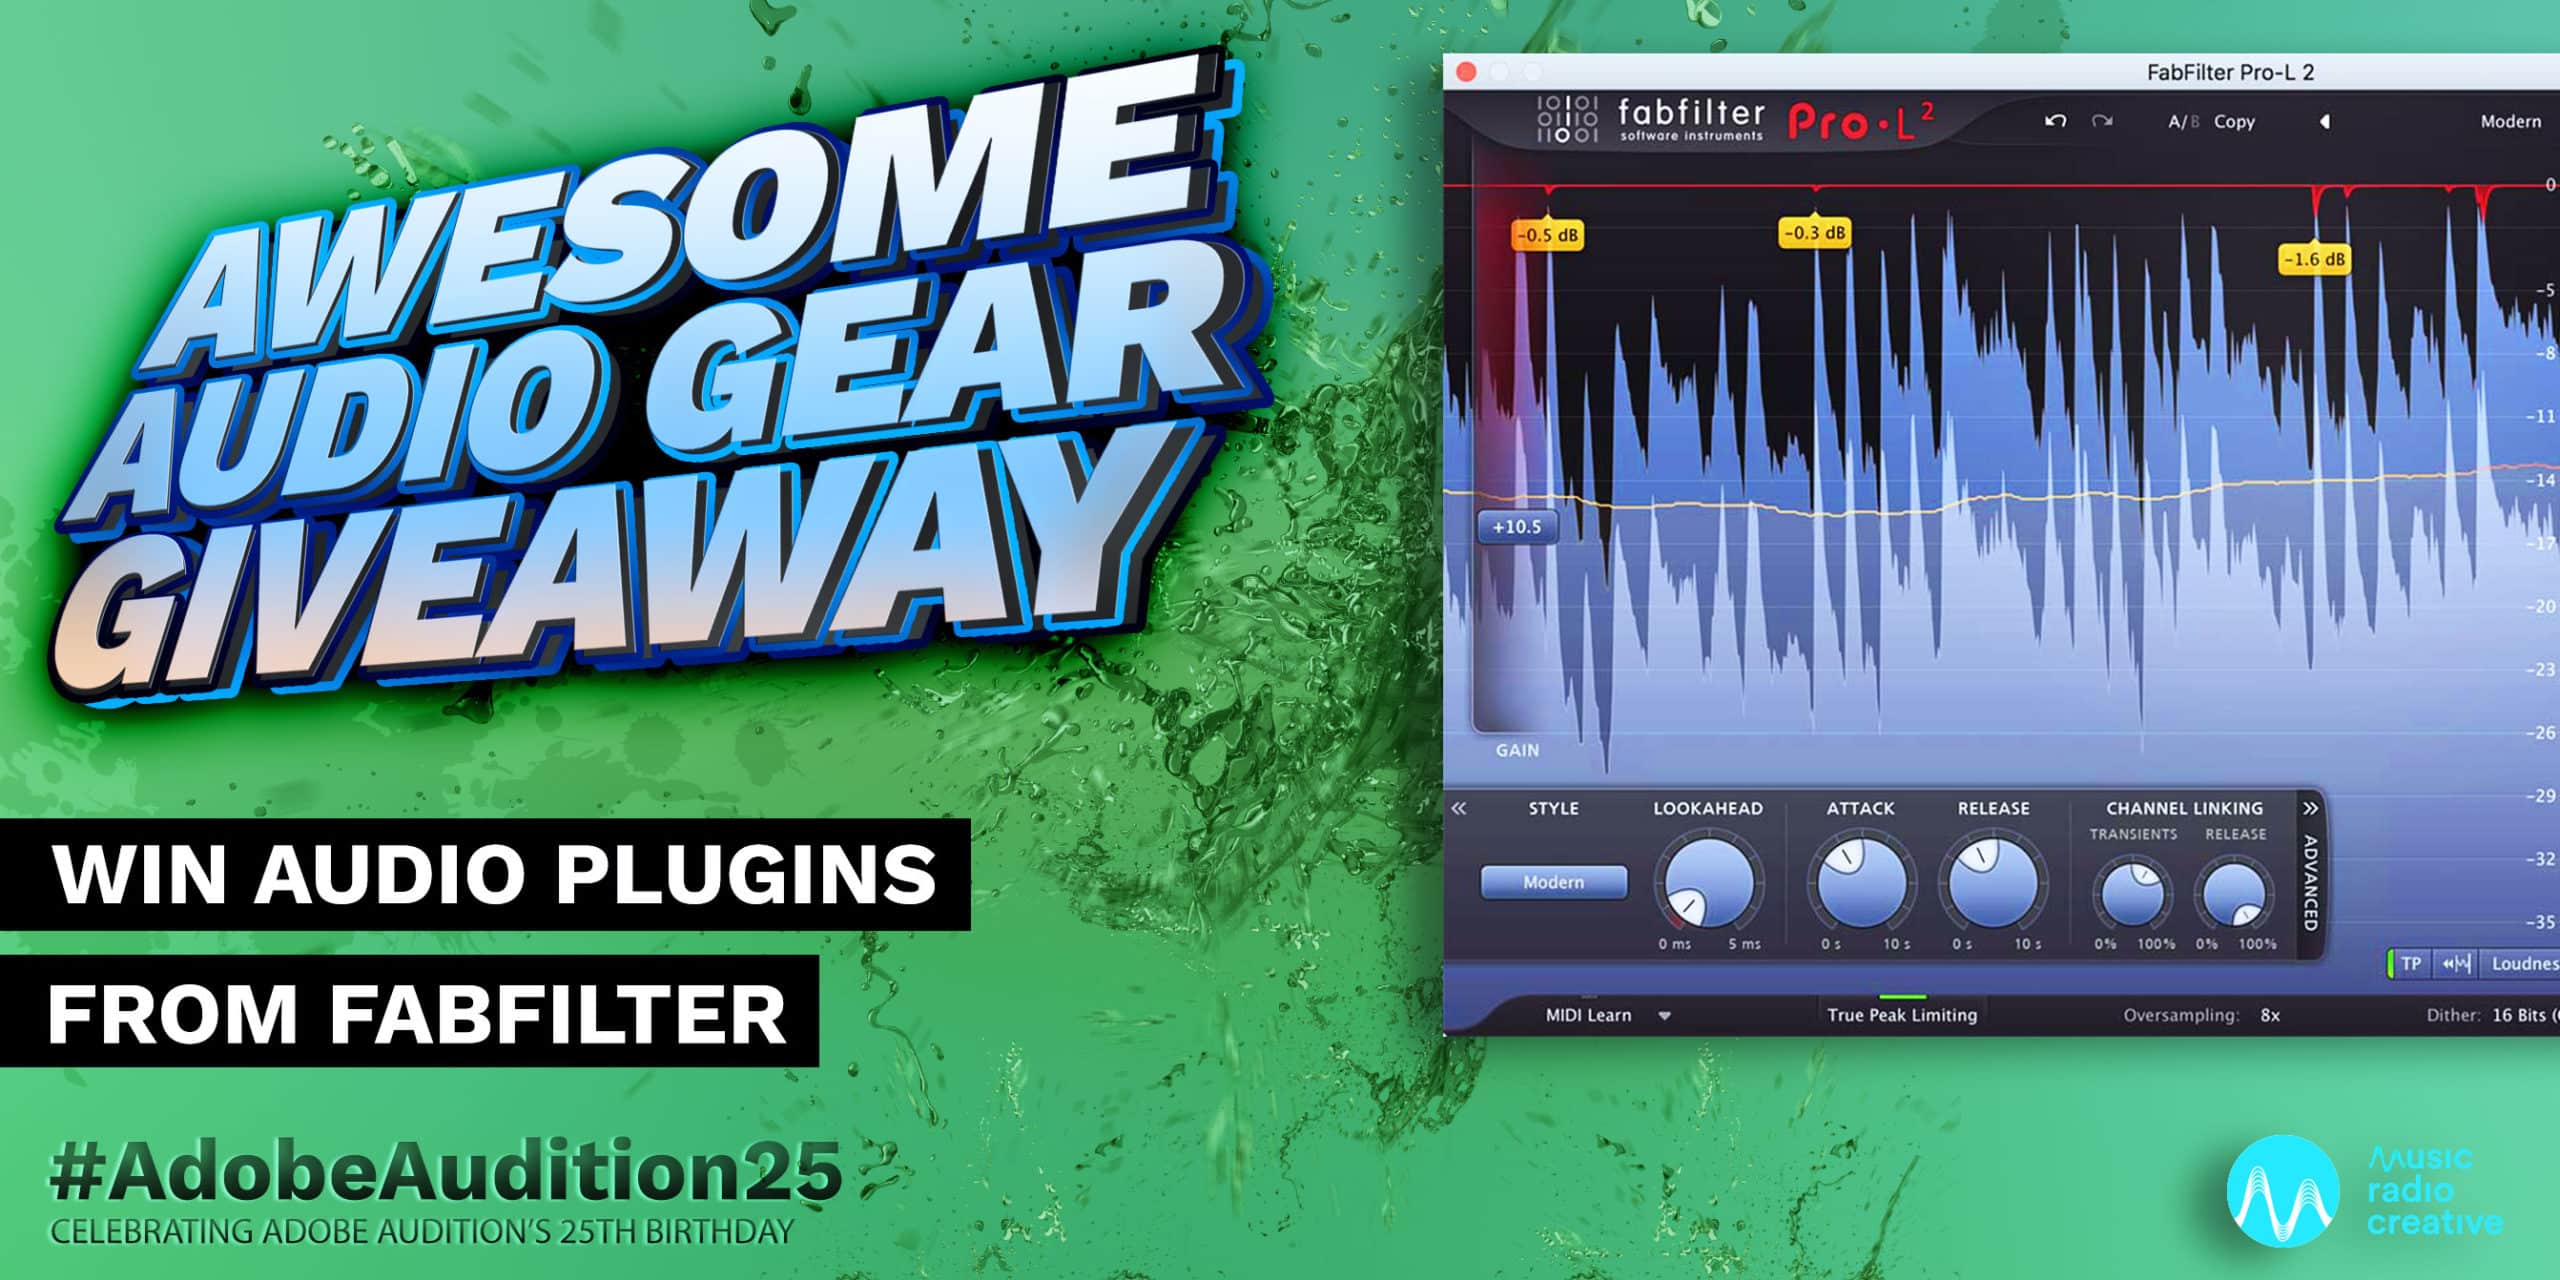 Win Audio Plugins from FabFilter Awesome Audio Gear Giveaway  Music Radio Creative